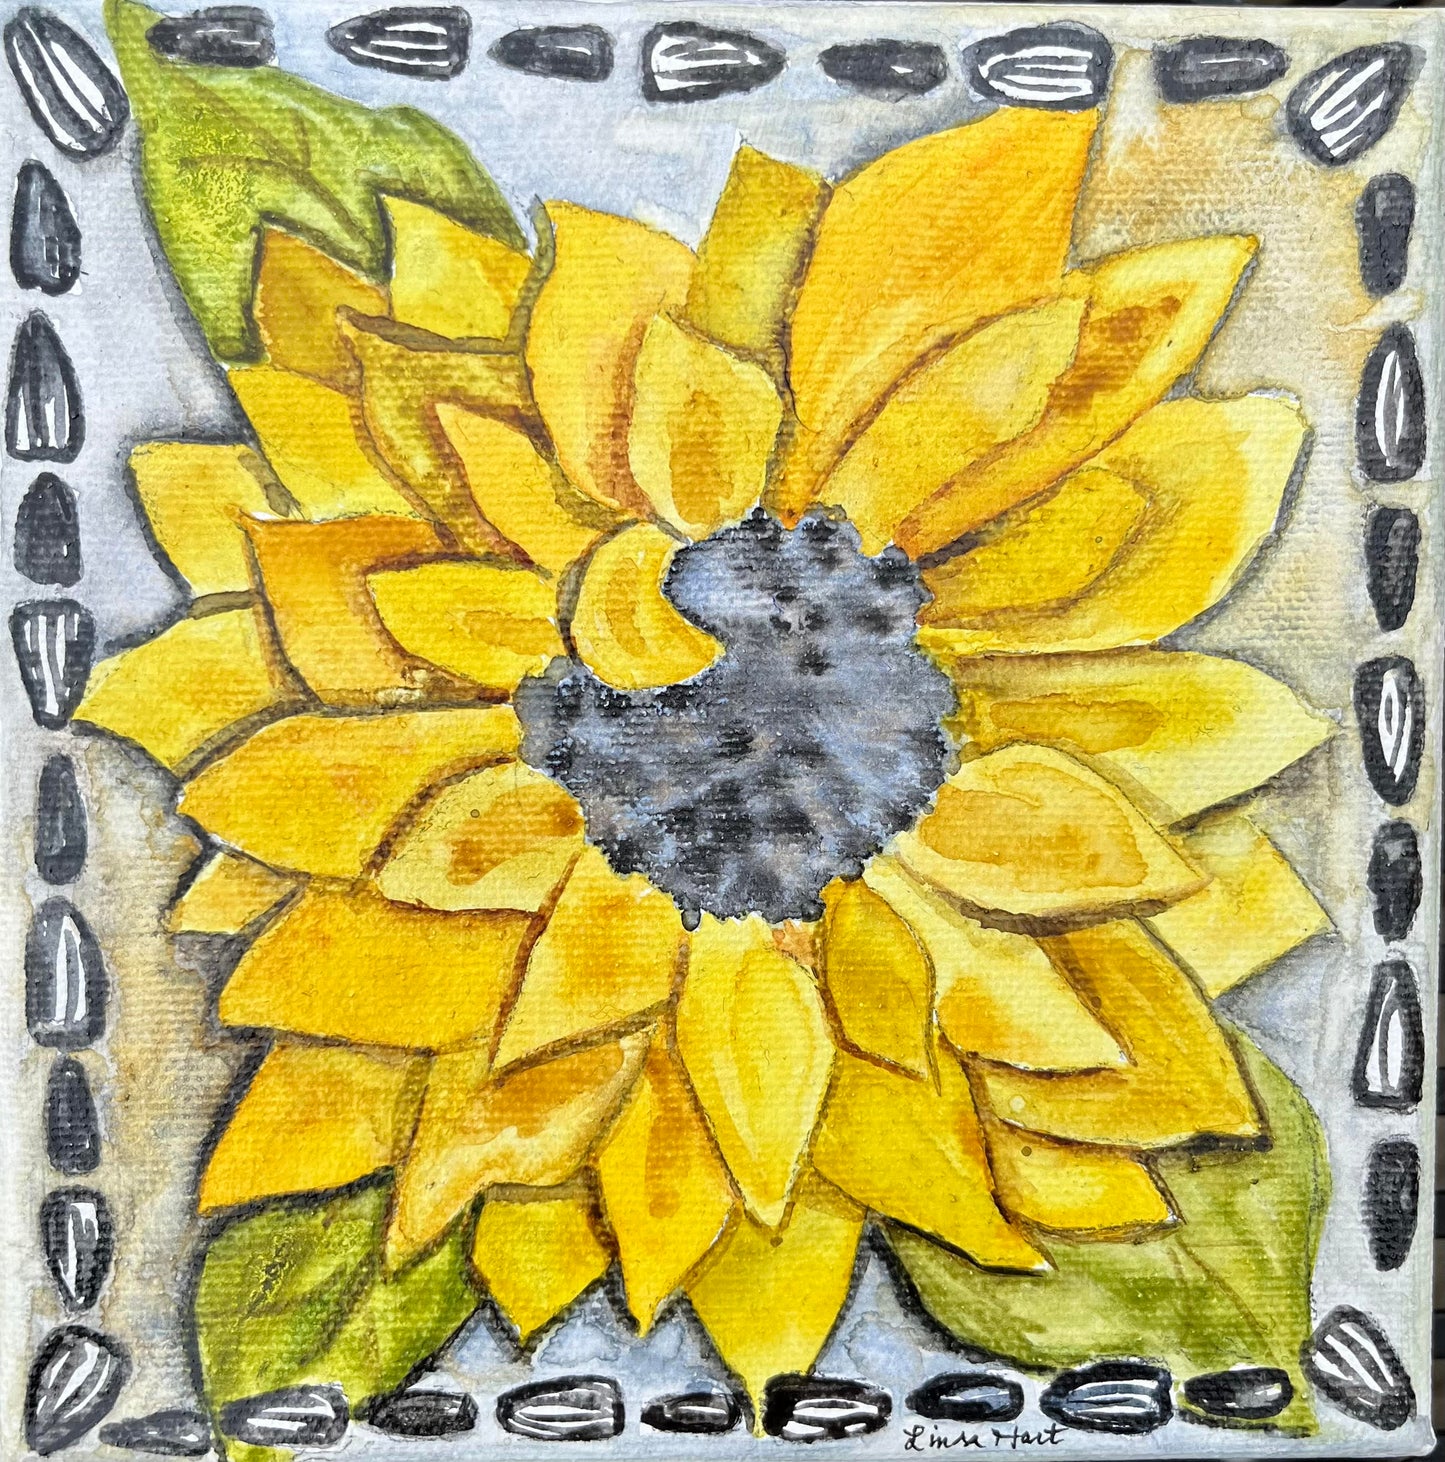 Sunflower Life - 6" x 6" x 1.5" - Original Watercolor Painting on Canvas